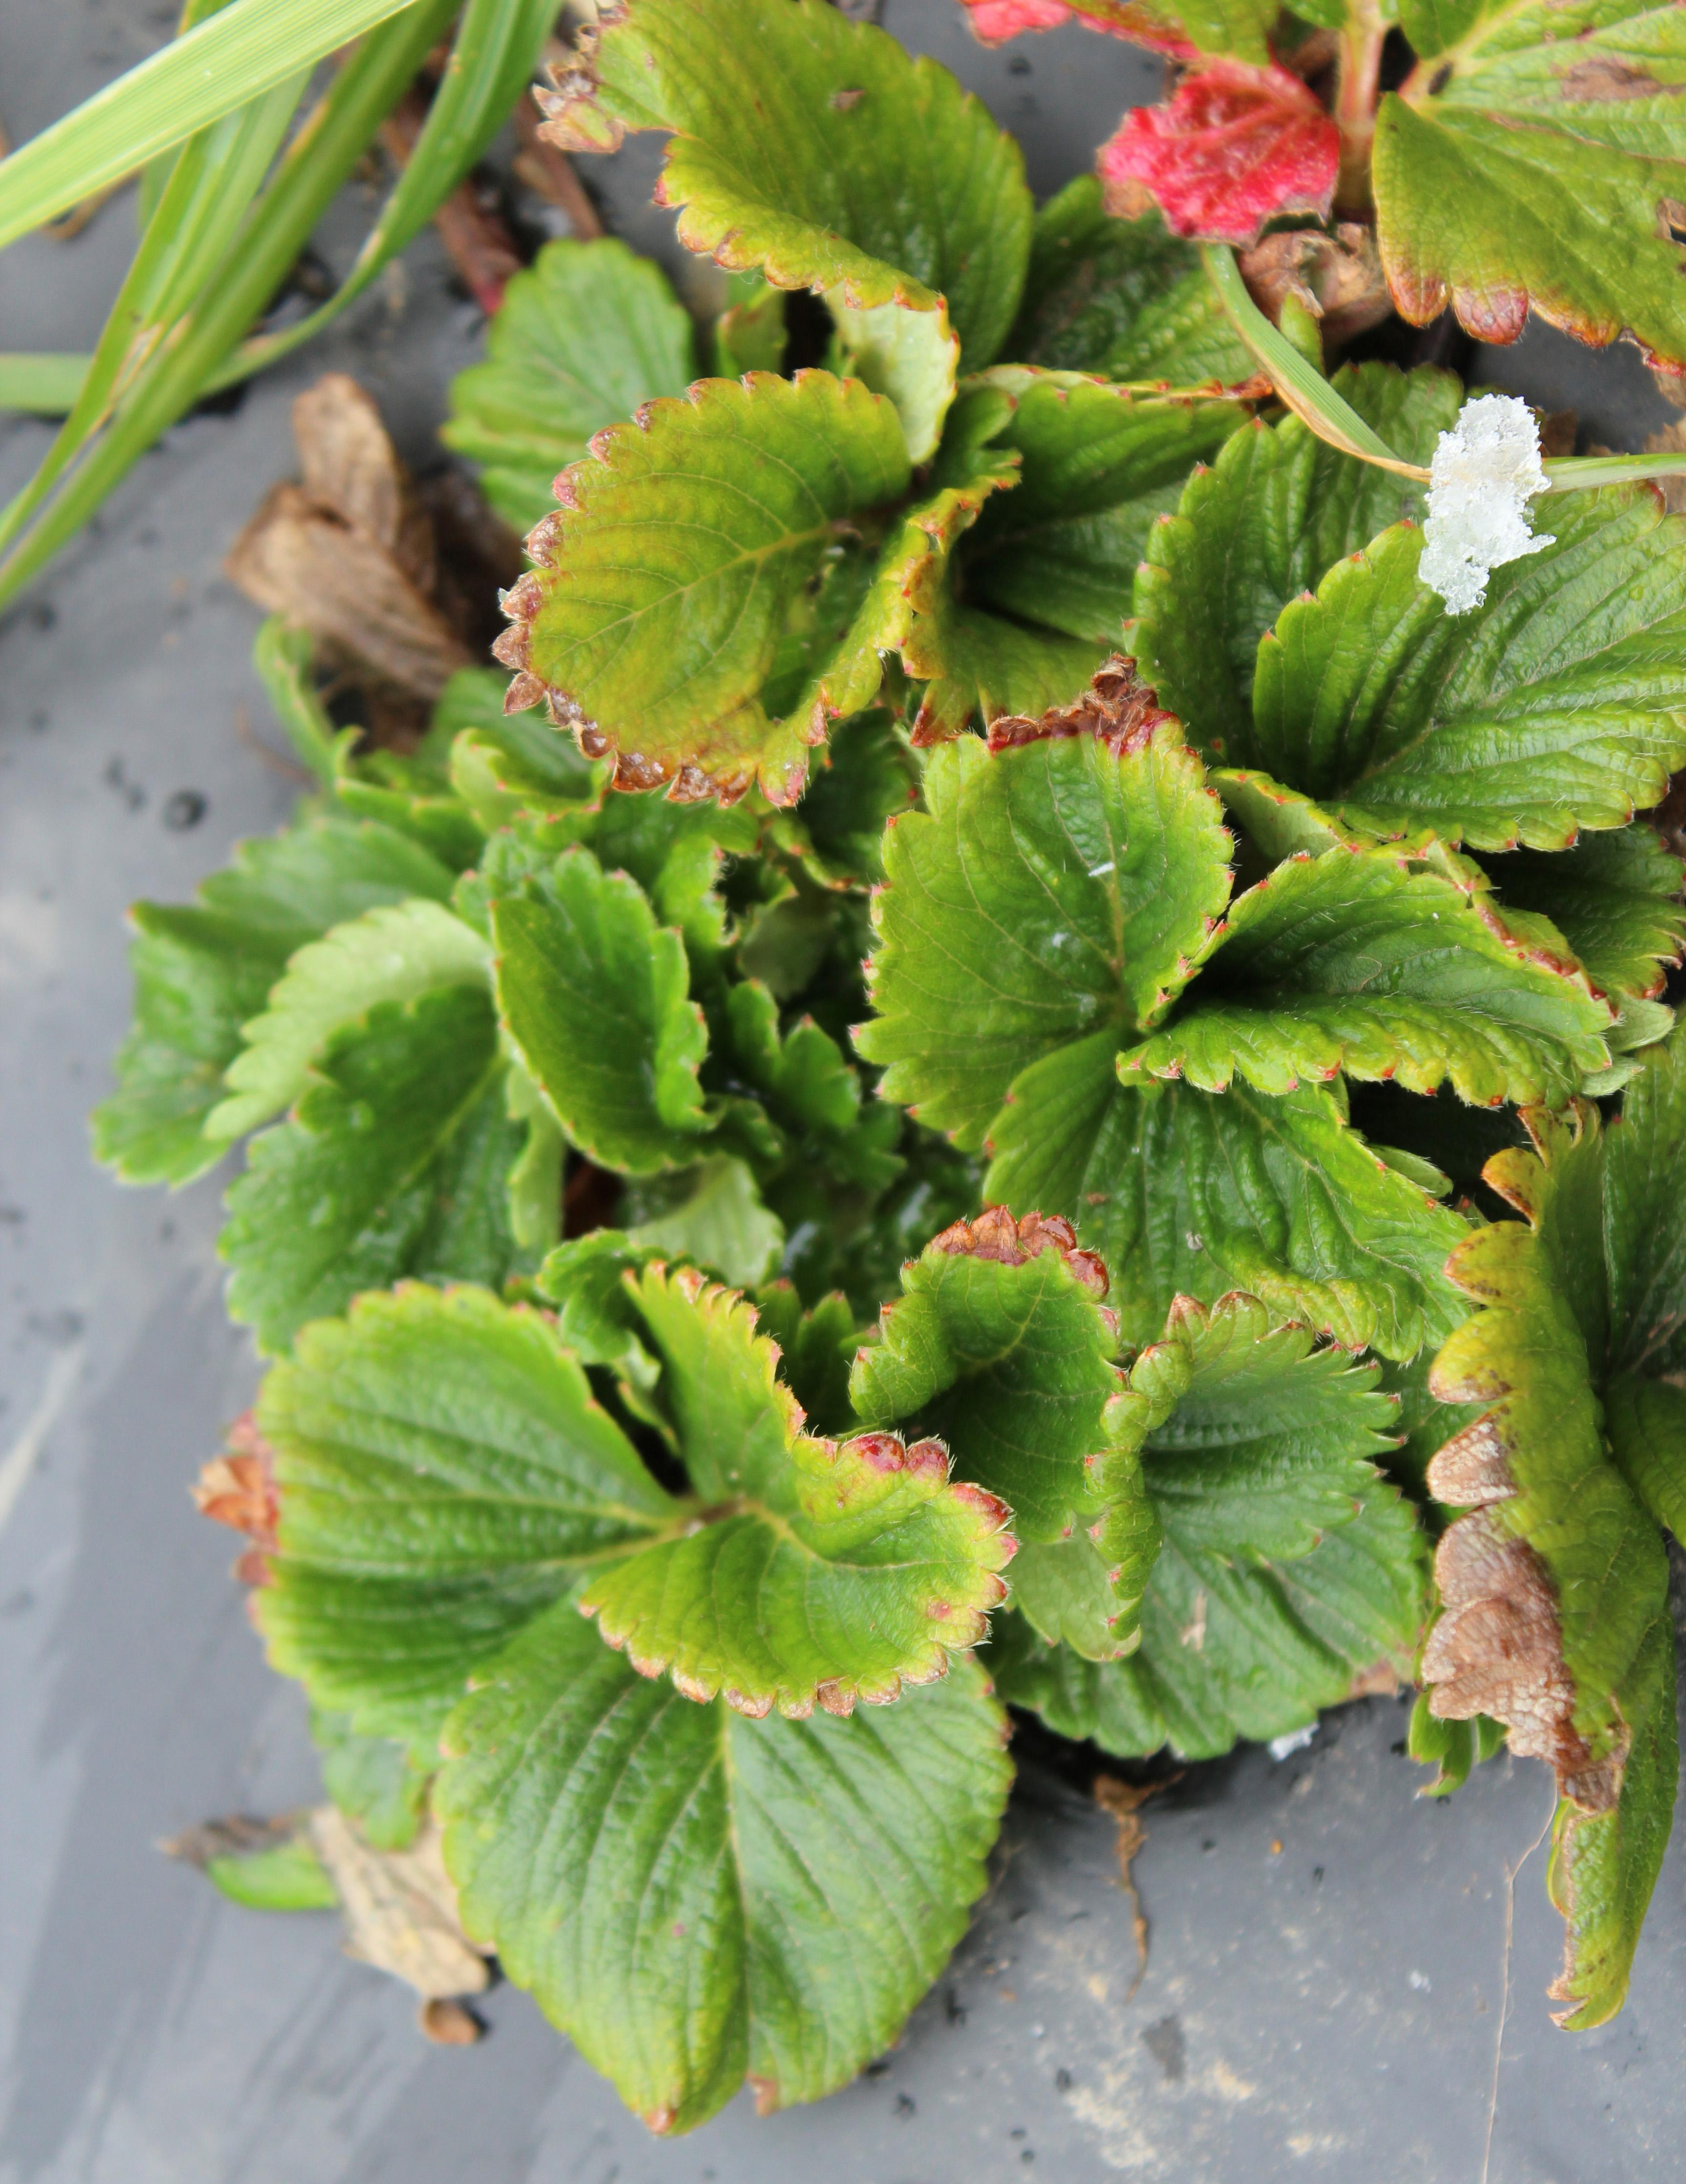 Planting infected with strawberry mosaic virus and strawberry mild yellow edge virus (Gauthier, UKY)